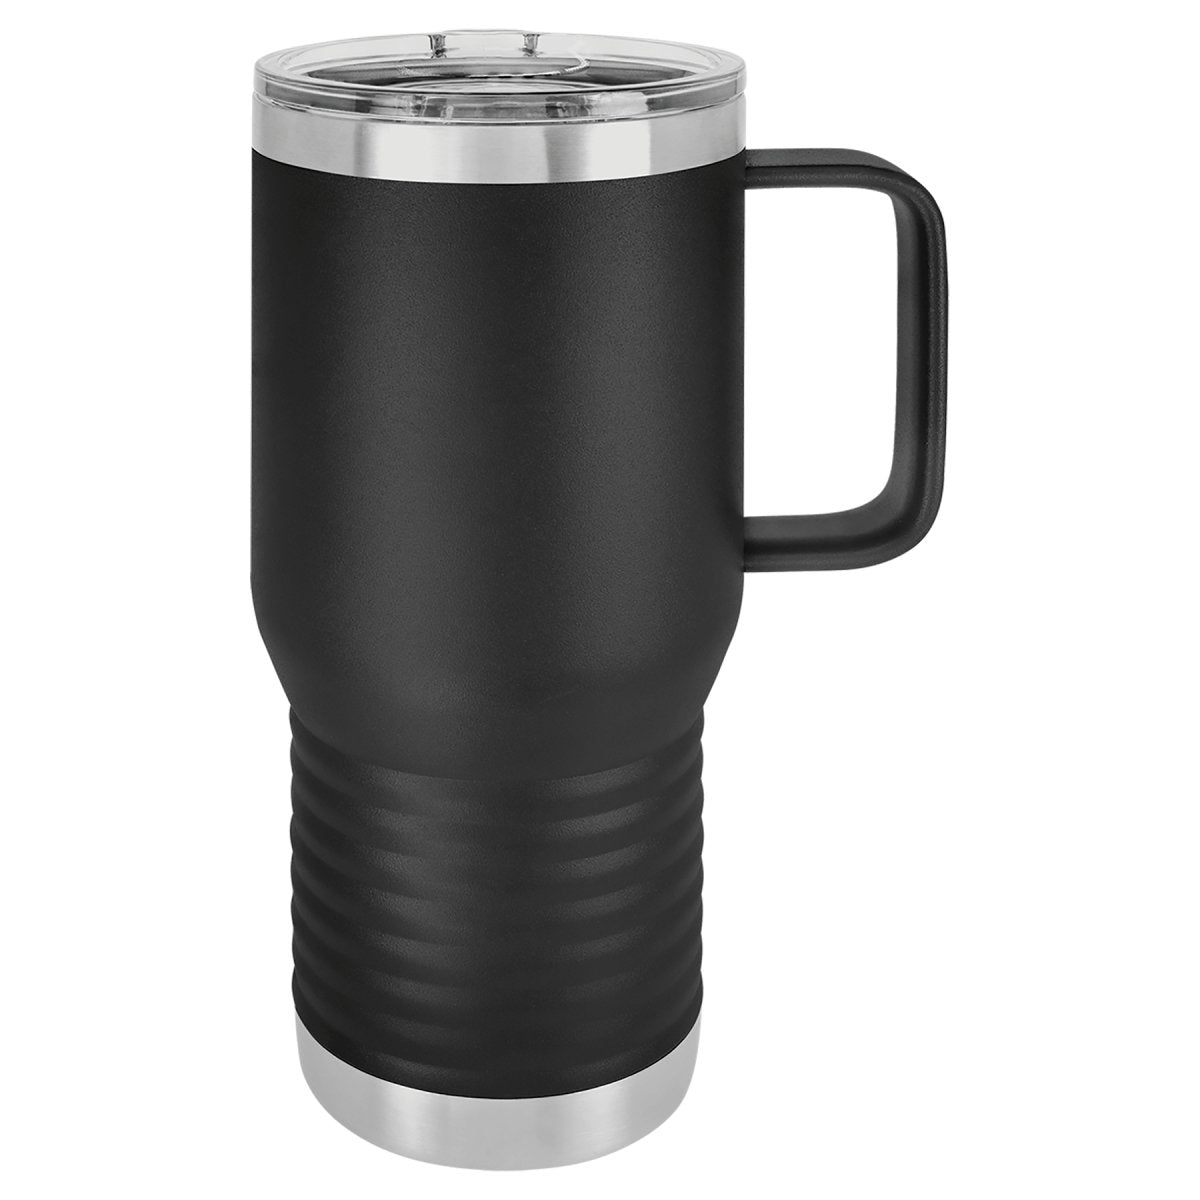  CafePress Pretty Paralegal Stainless Steel Travel Mug Stainless  Steel Travel Mug, Insulated 20 oz. Coffee Tumbler : Home & Kitchen